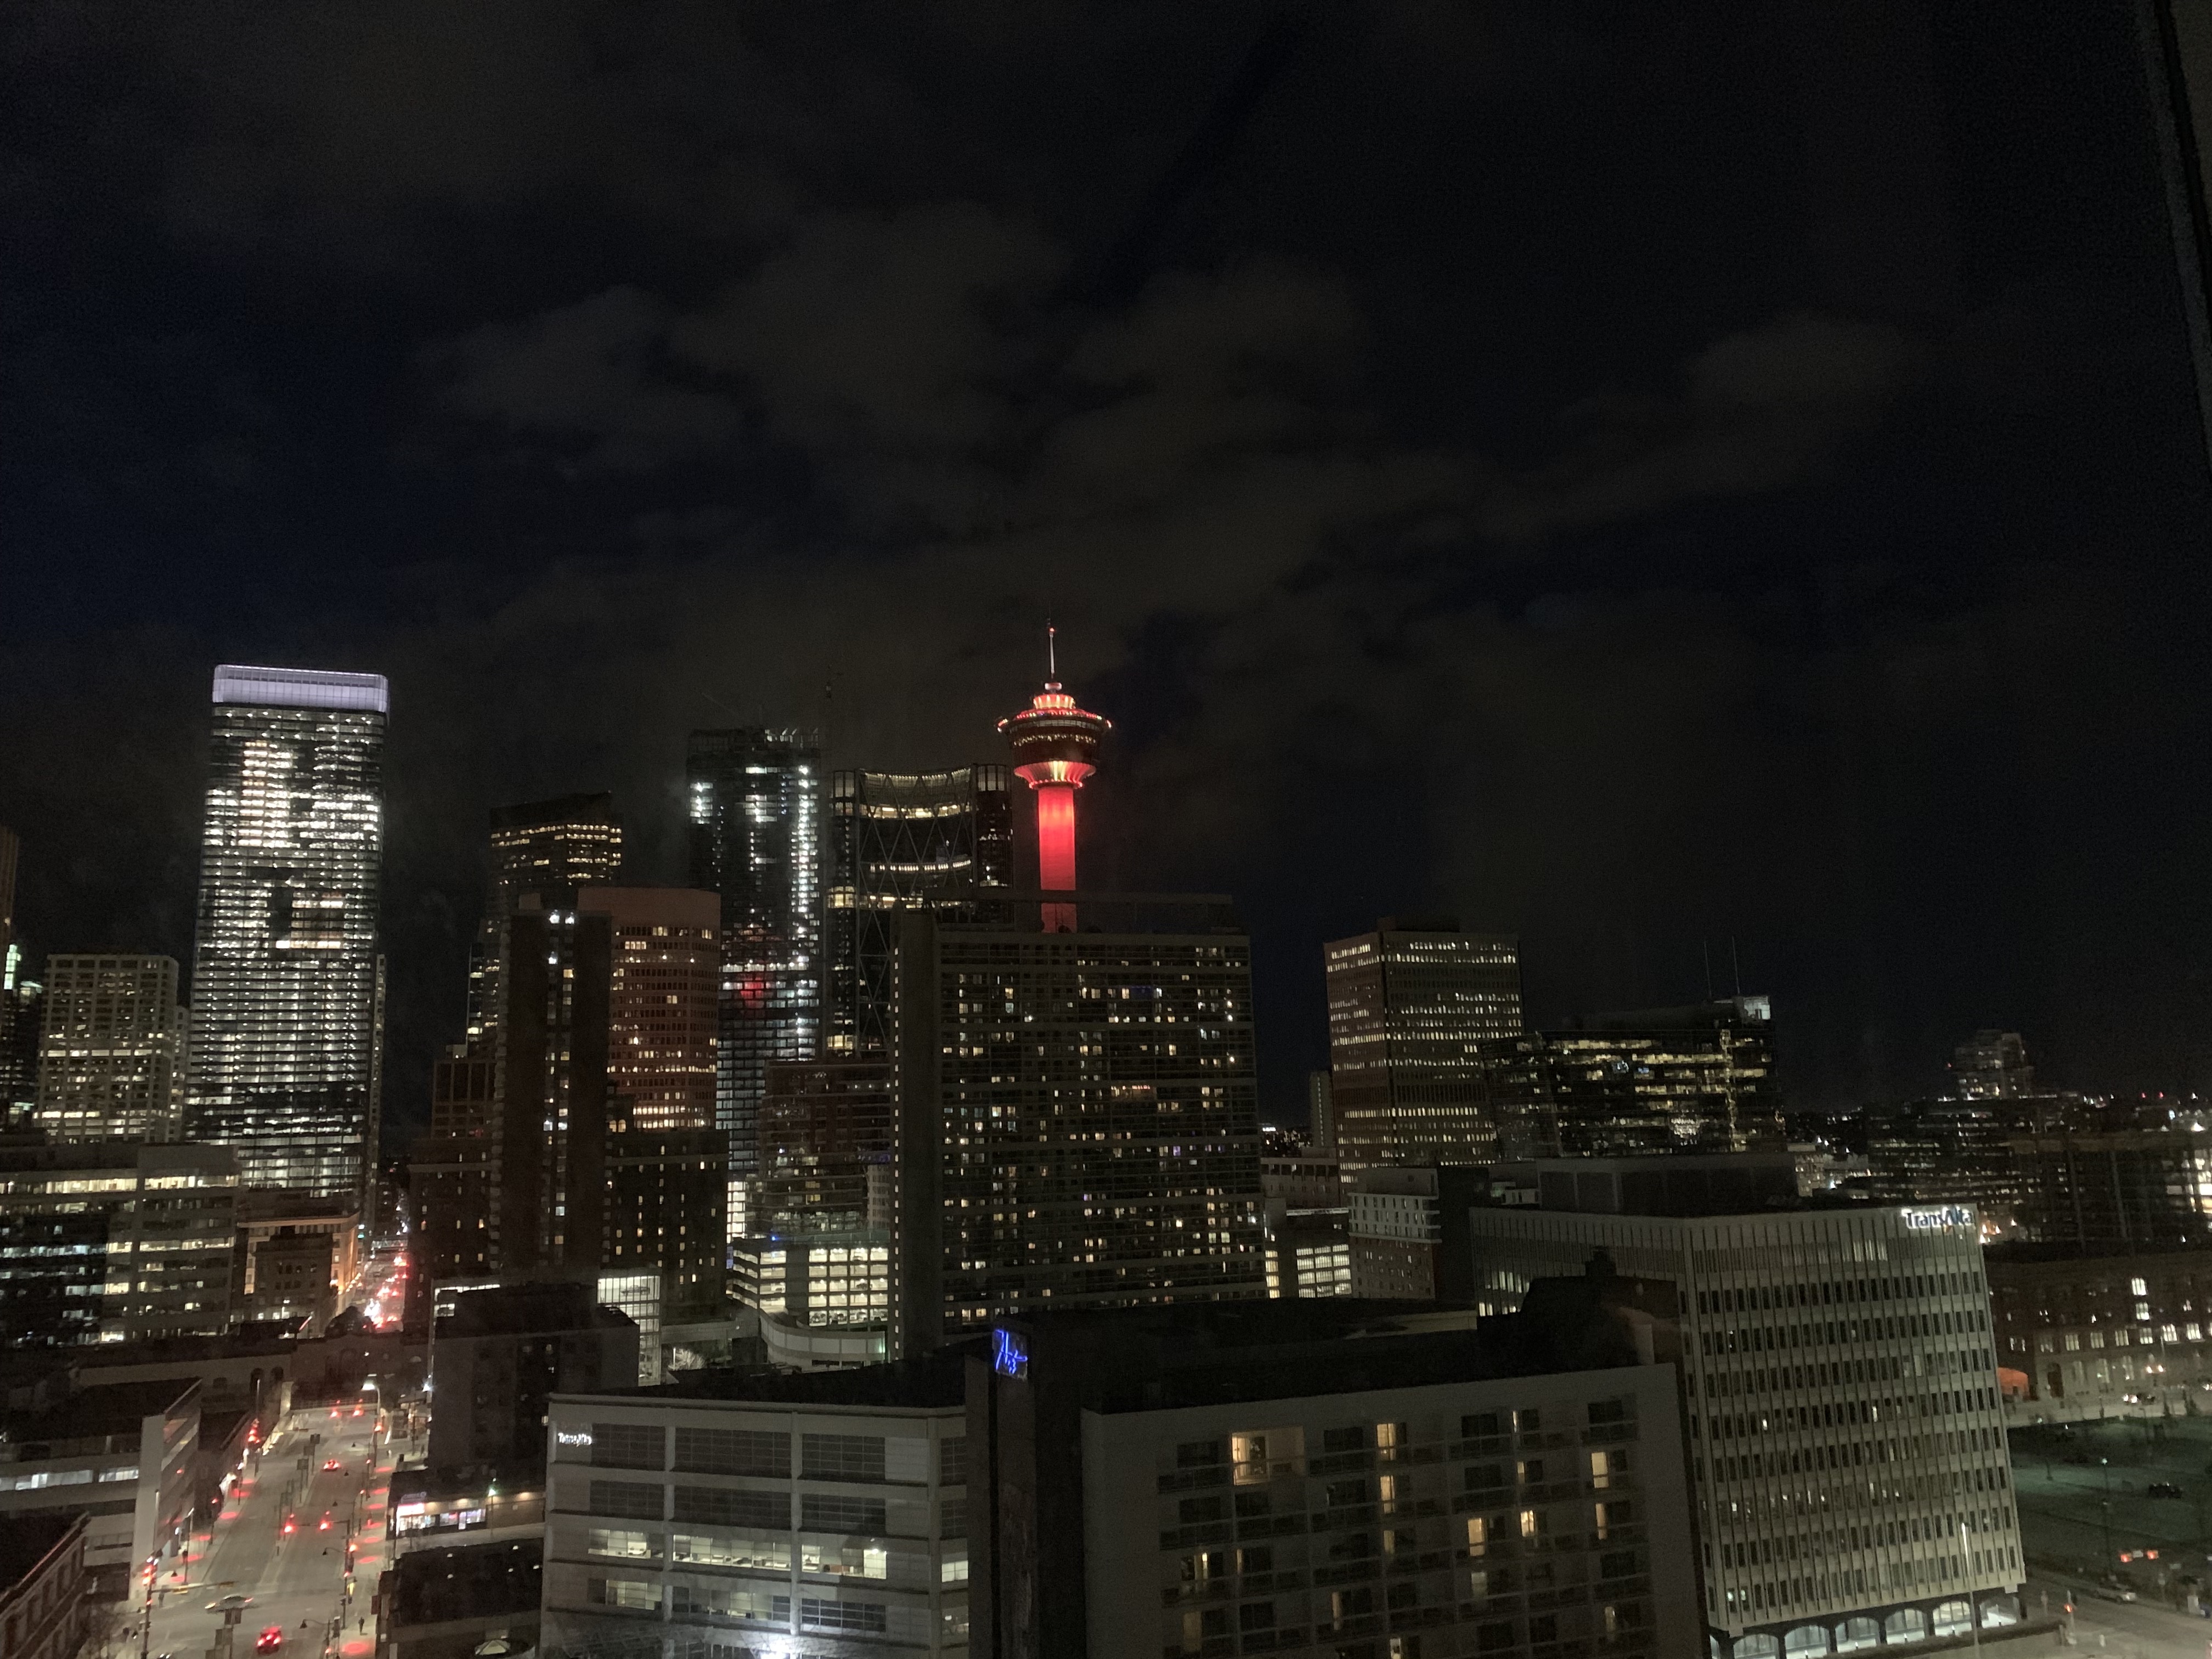 Calgary Tower lit red for the Calgary Flames (it didn't help)